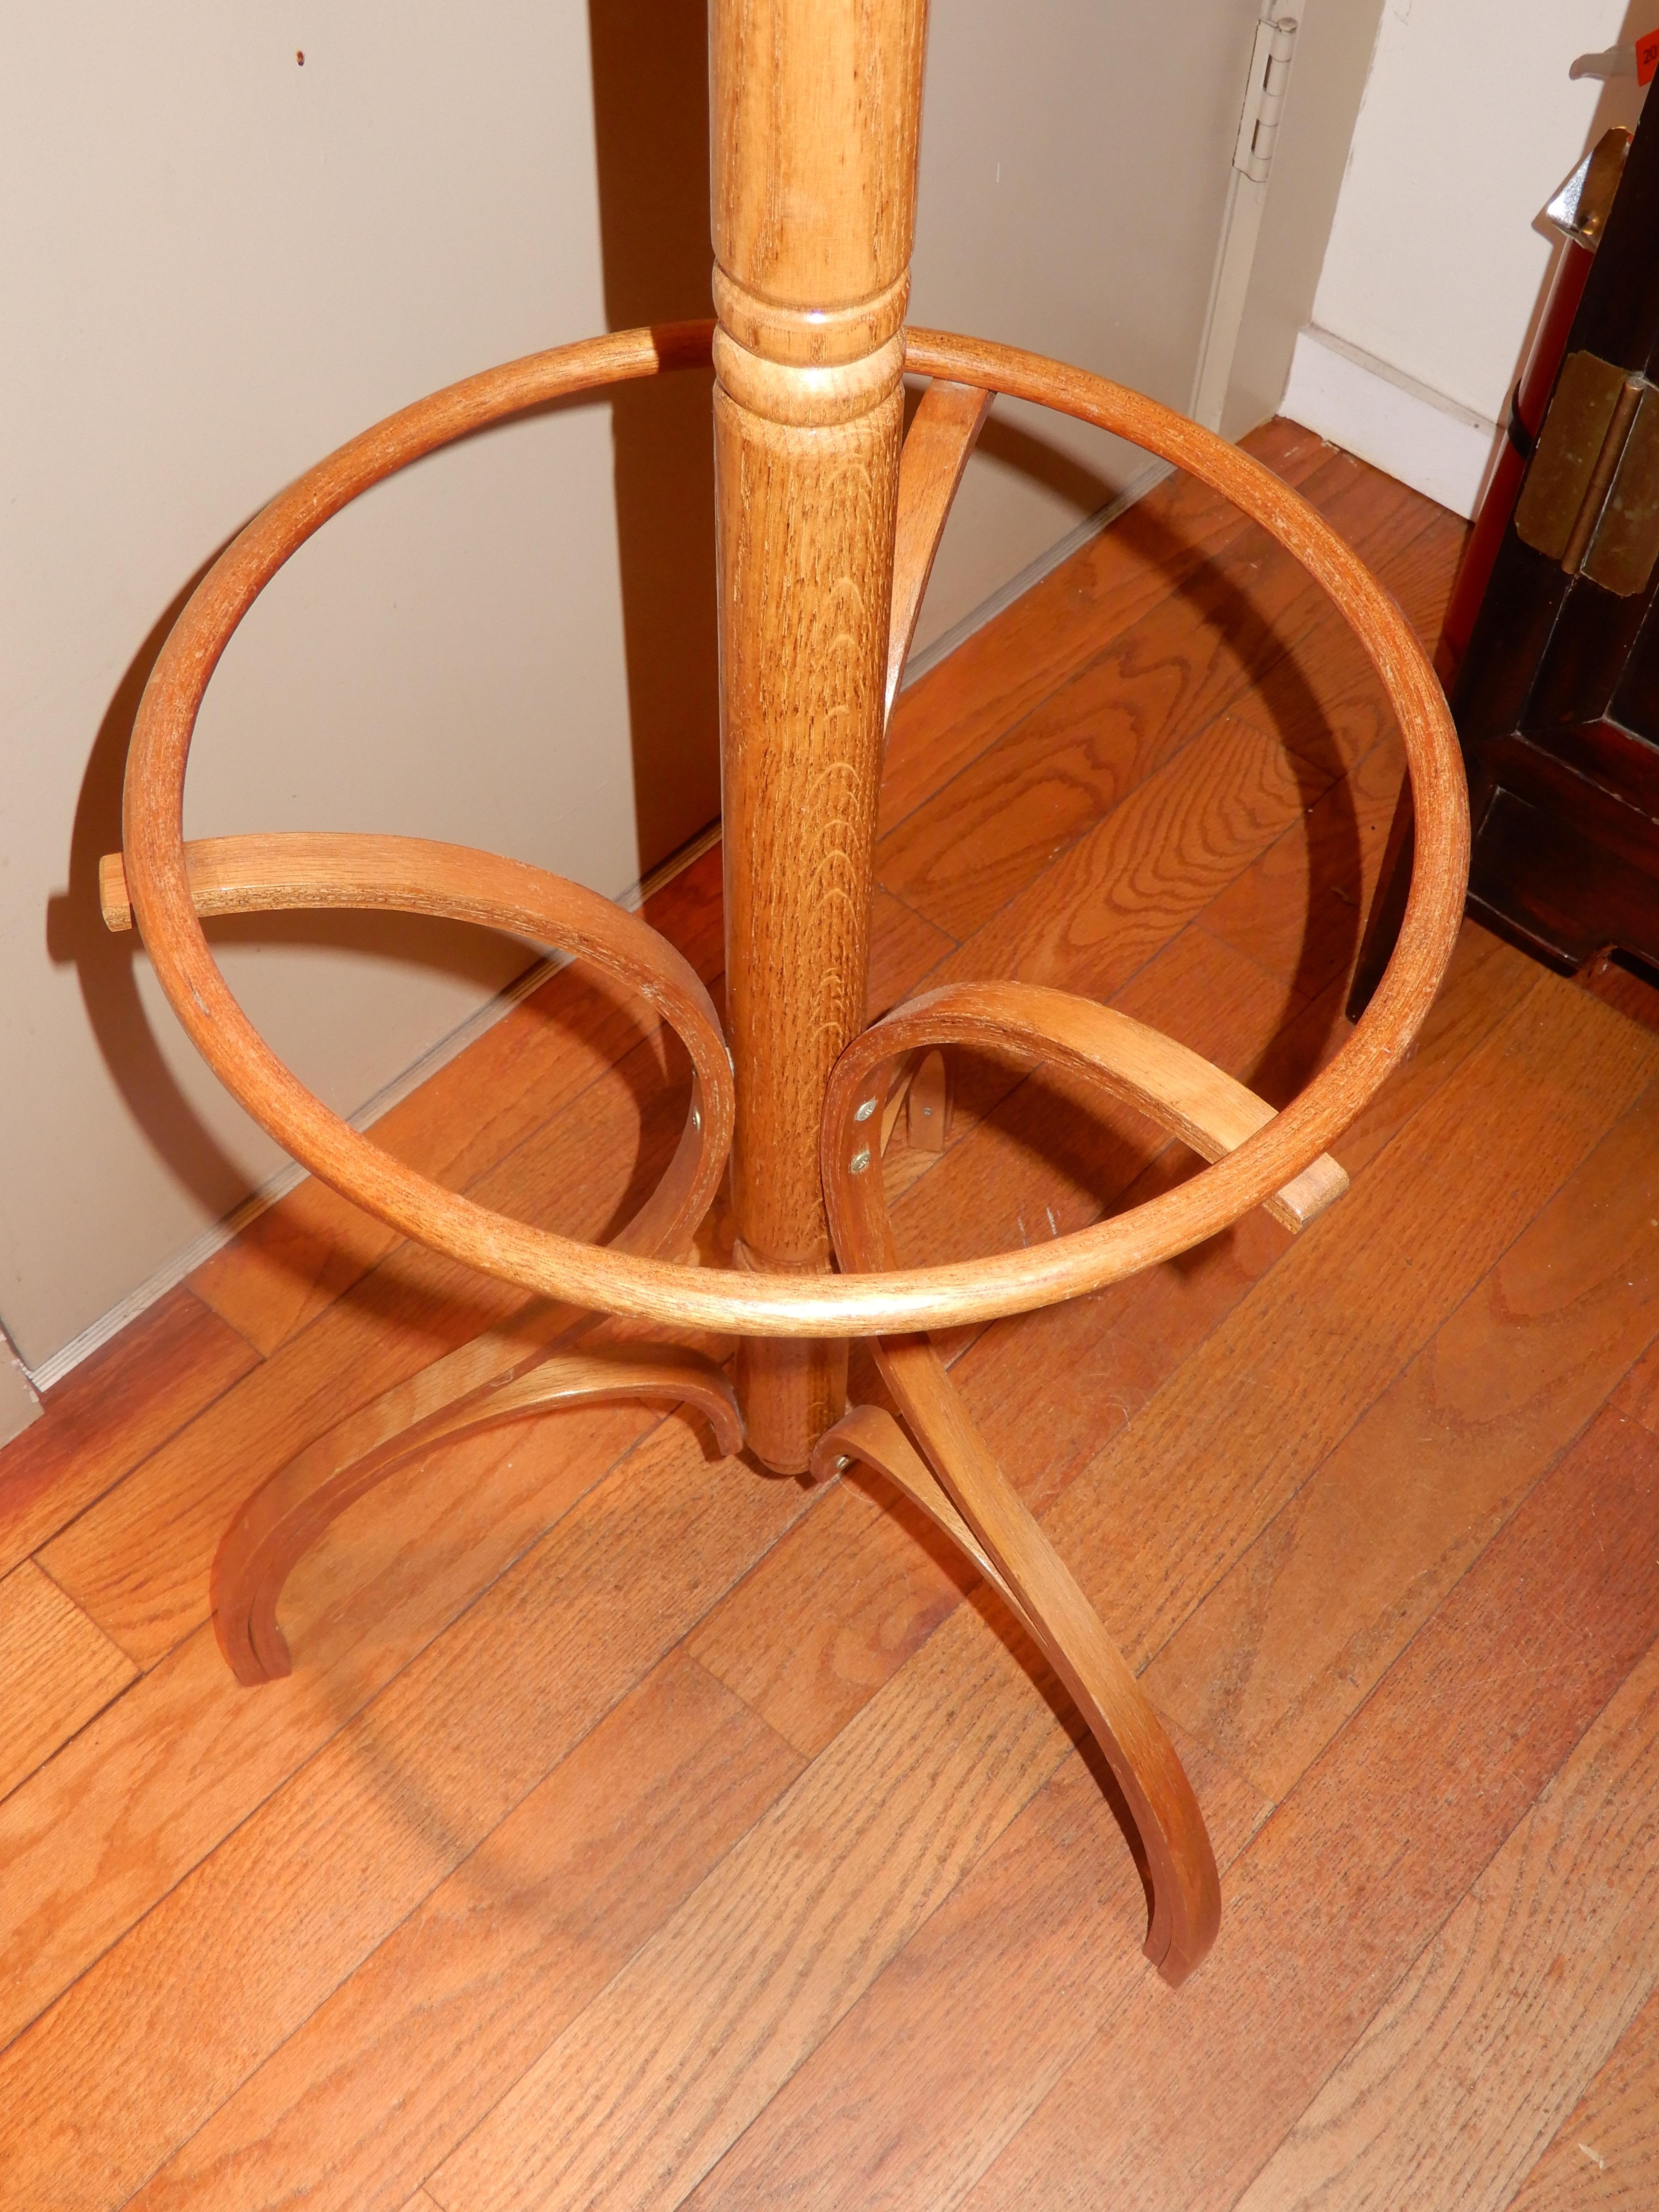 Hand-Crafted American Handcrafted White Oak Coat Stand For Sale